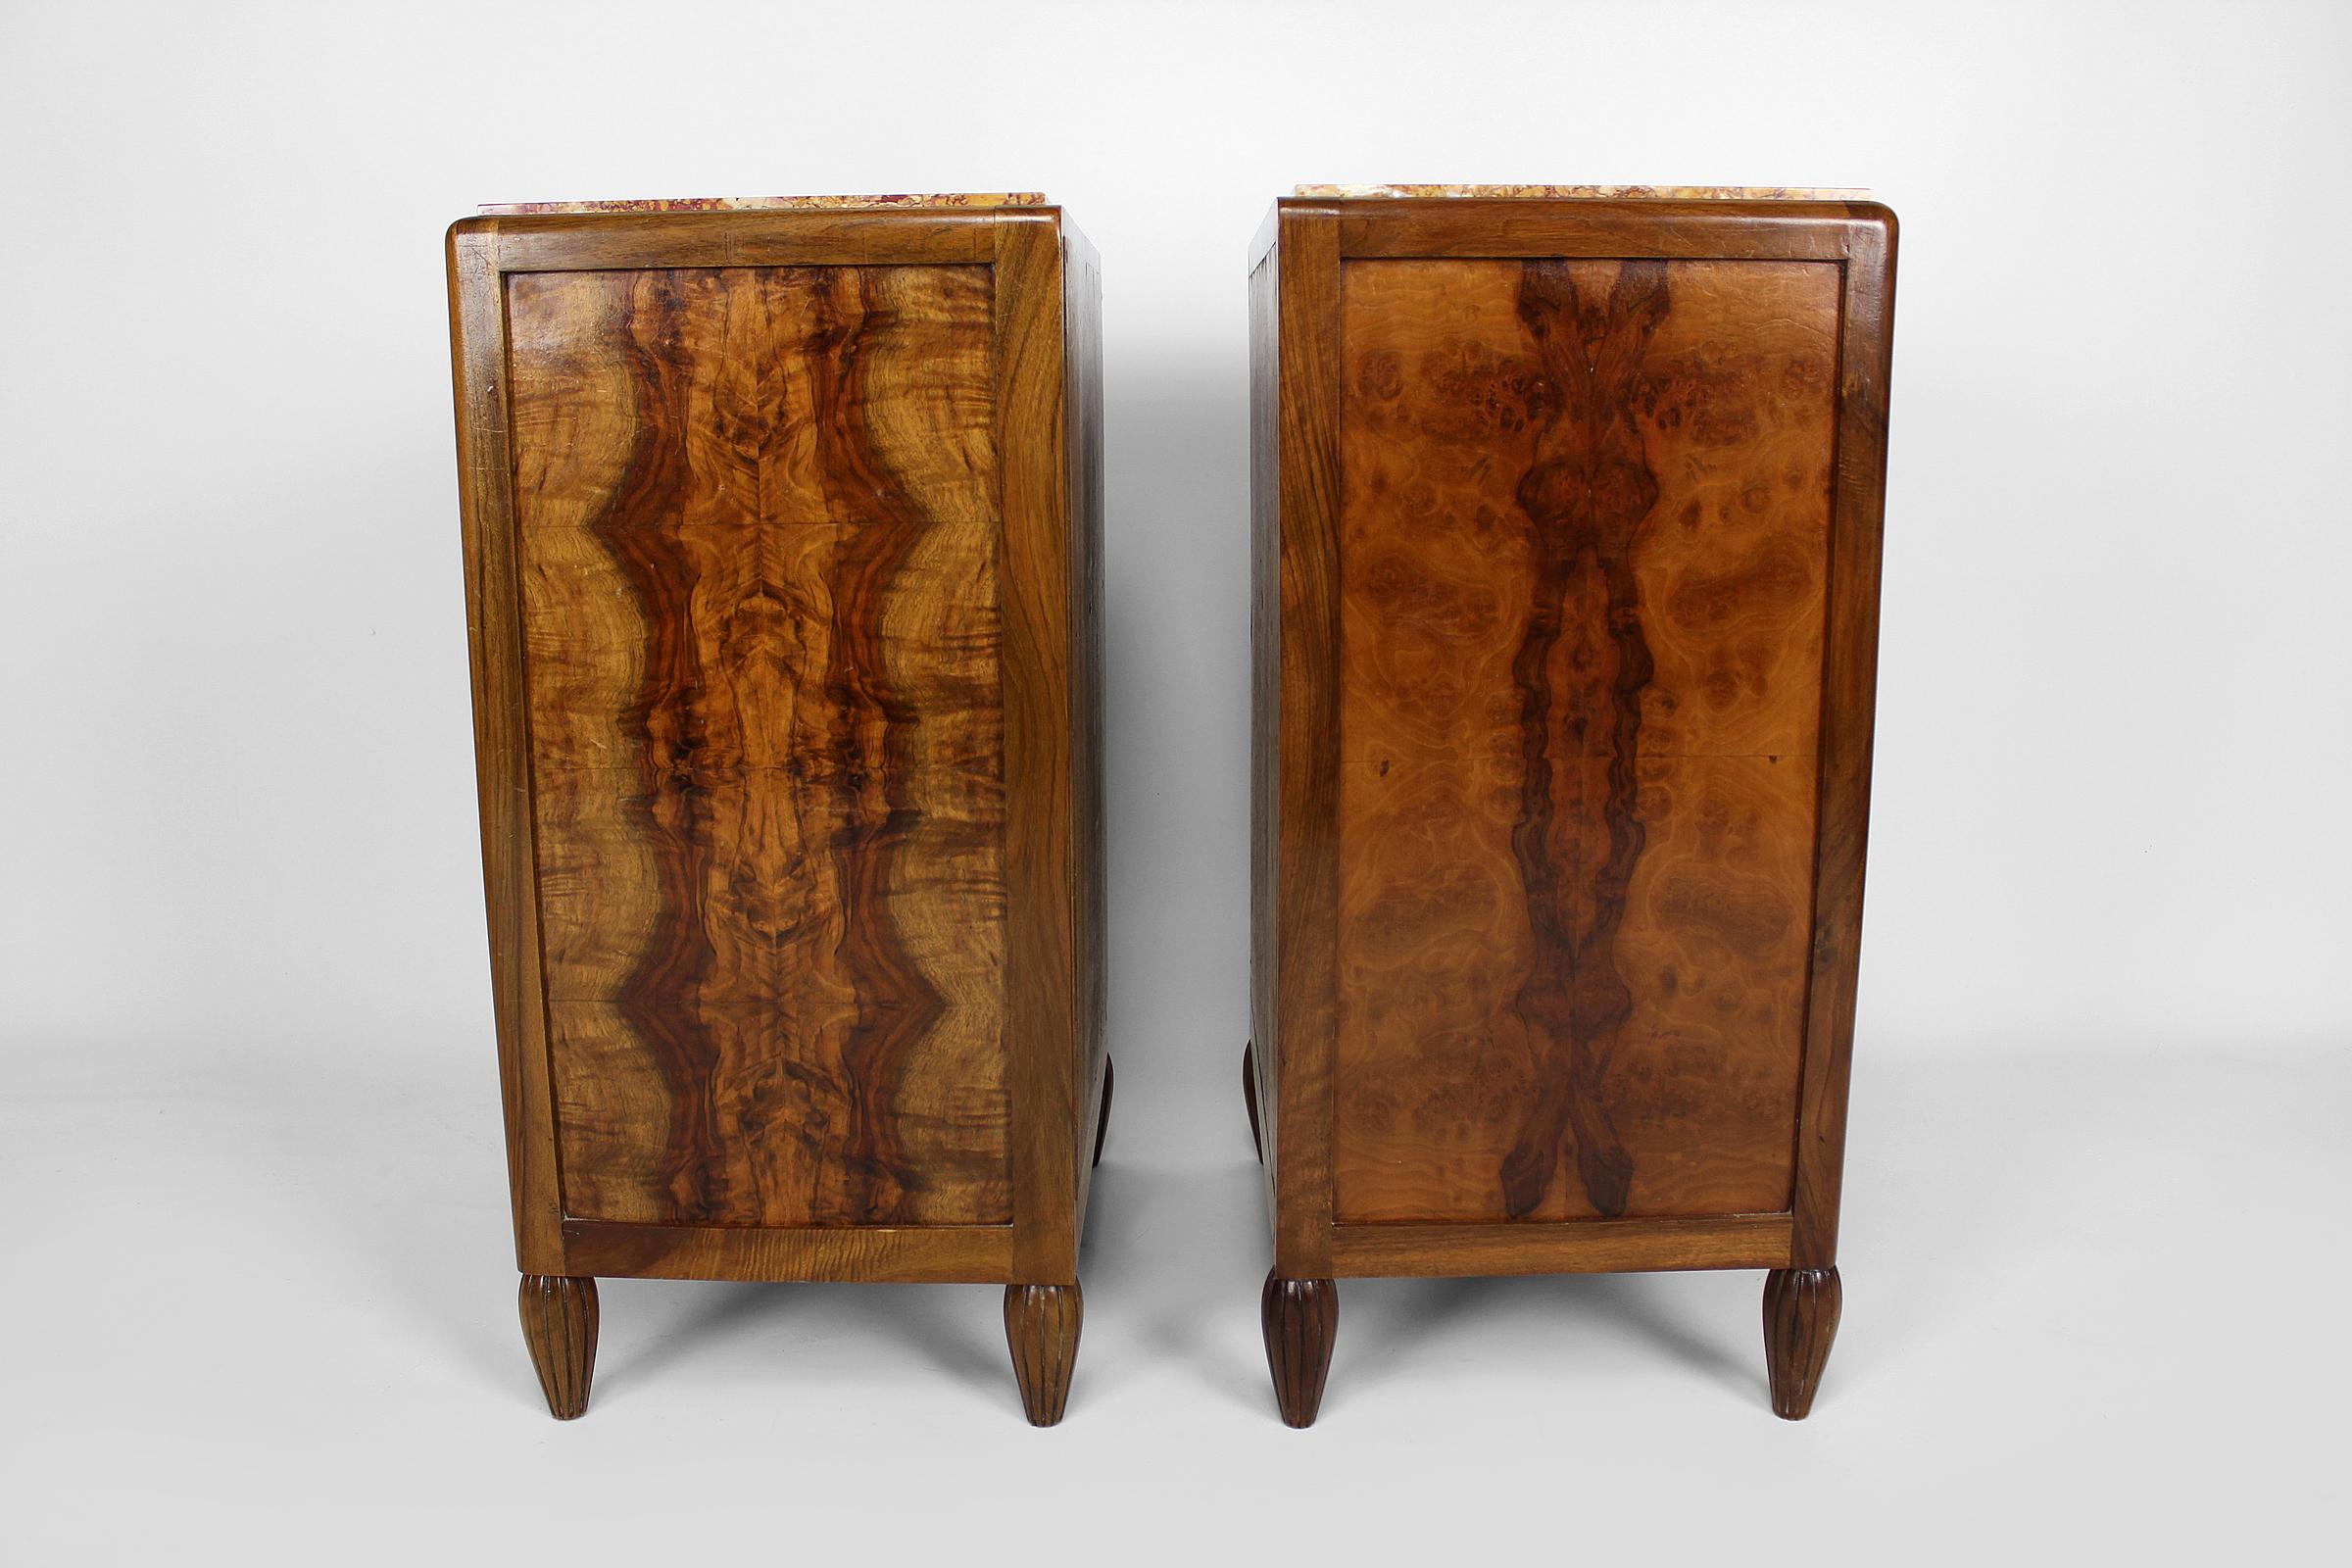 Bronze Pair of Art Deco Bedside Tables by Ateliers Gauthier-Poinsignon, circa 1920-1930 For Sale